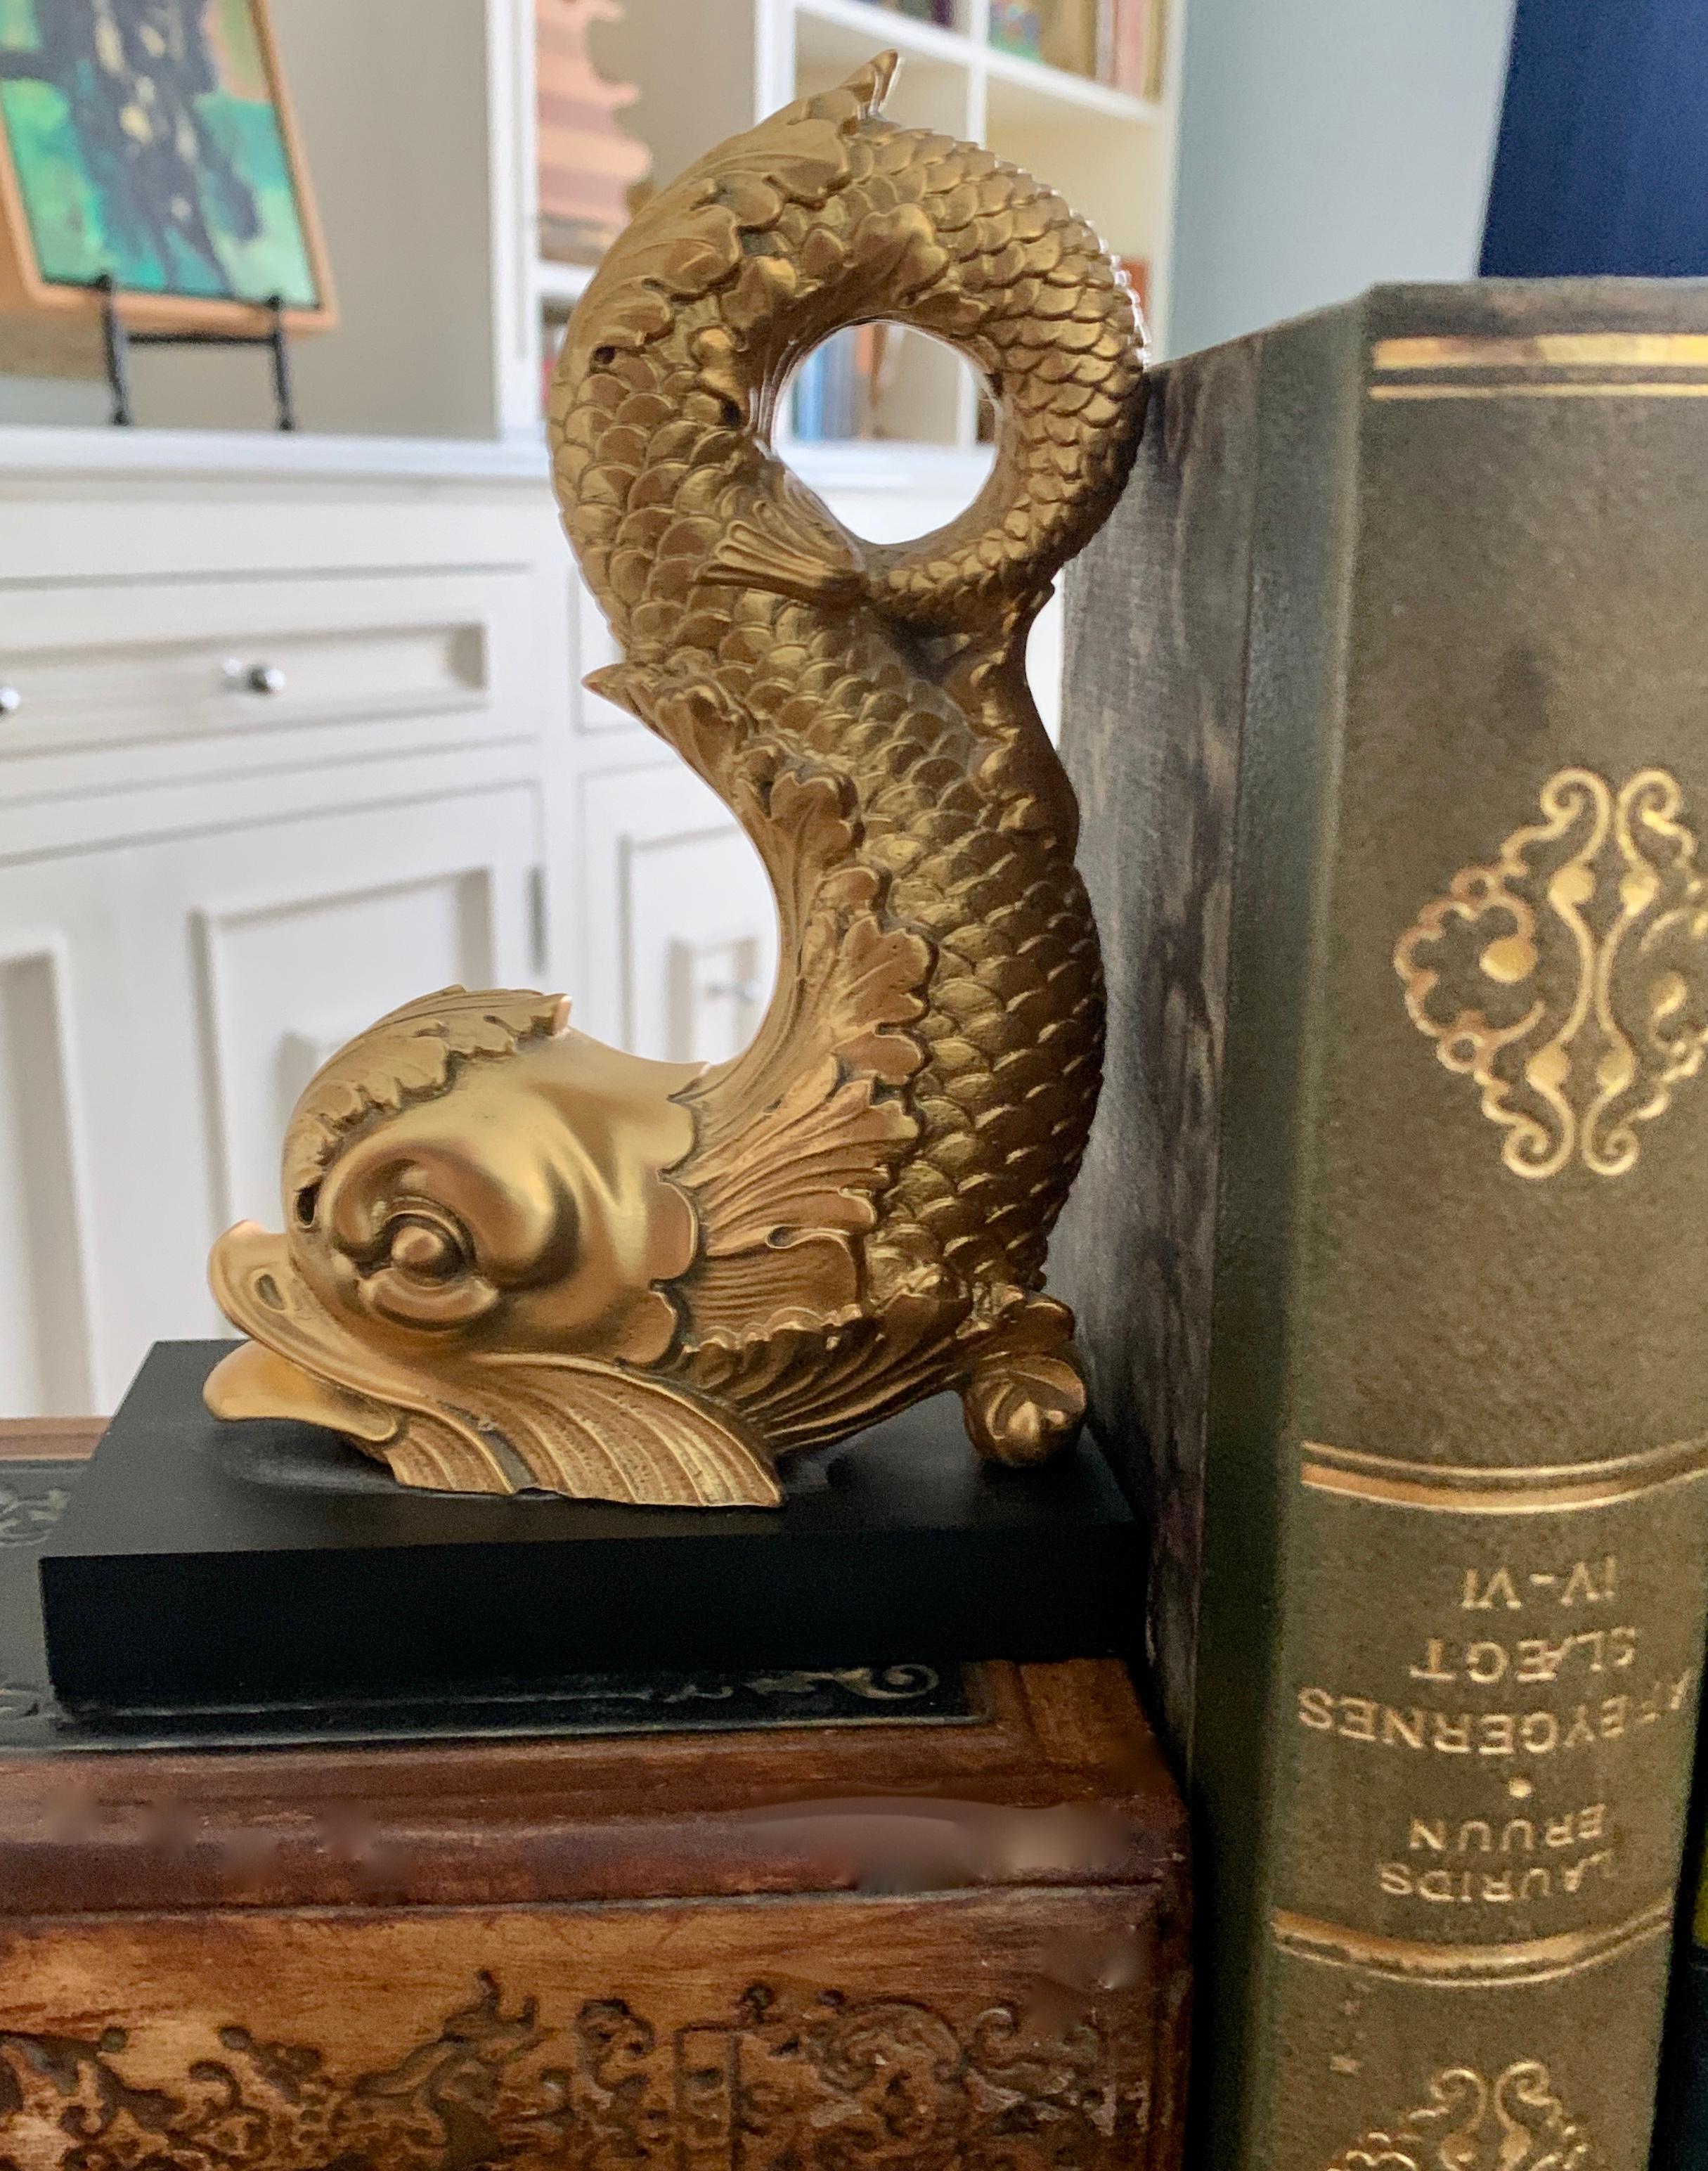 Gilded metal dolphin bookend on marble base, a very detailed form perfectly suited as a paper weight, sculpture or bookend in many rooms. Decorative as a stand alone piece or practical on the desk top or den.